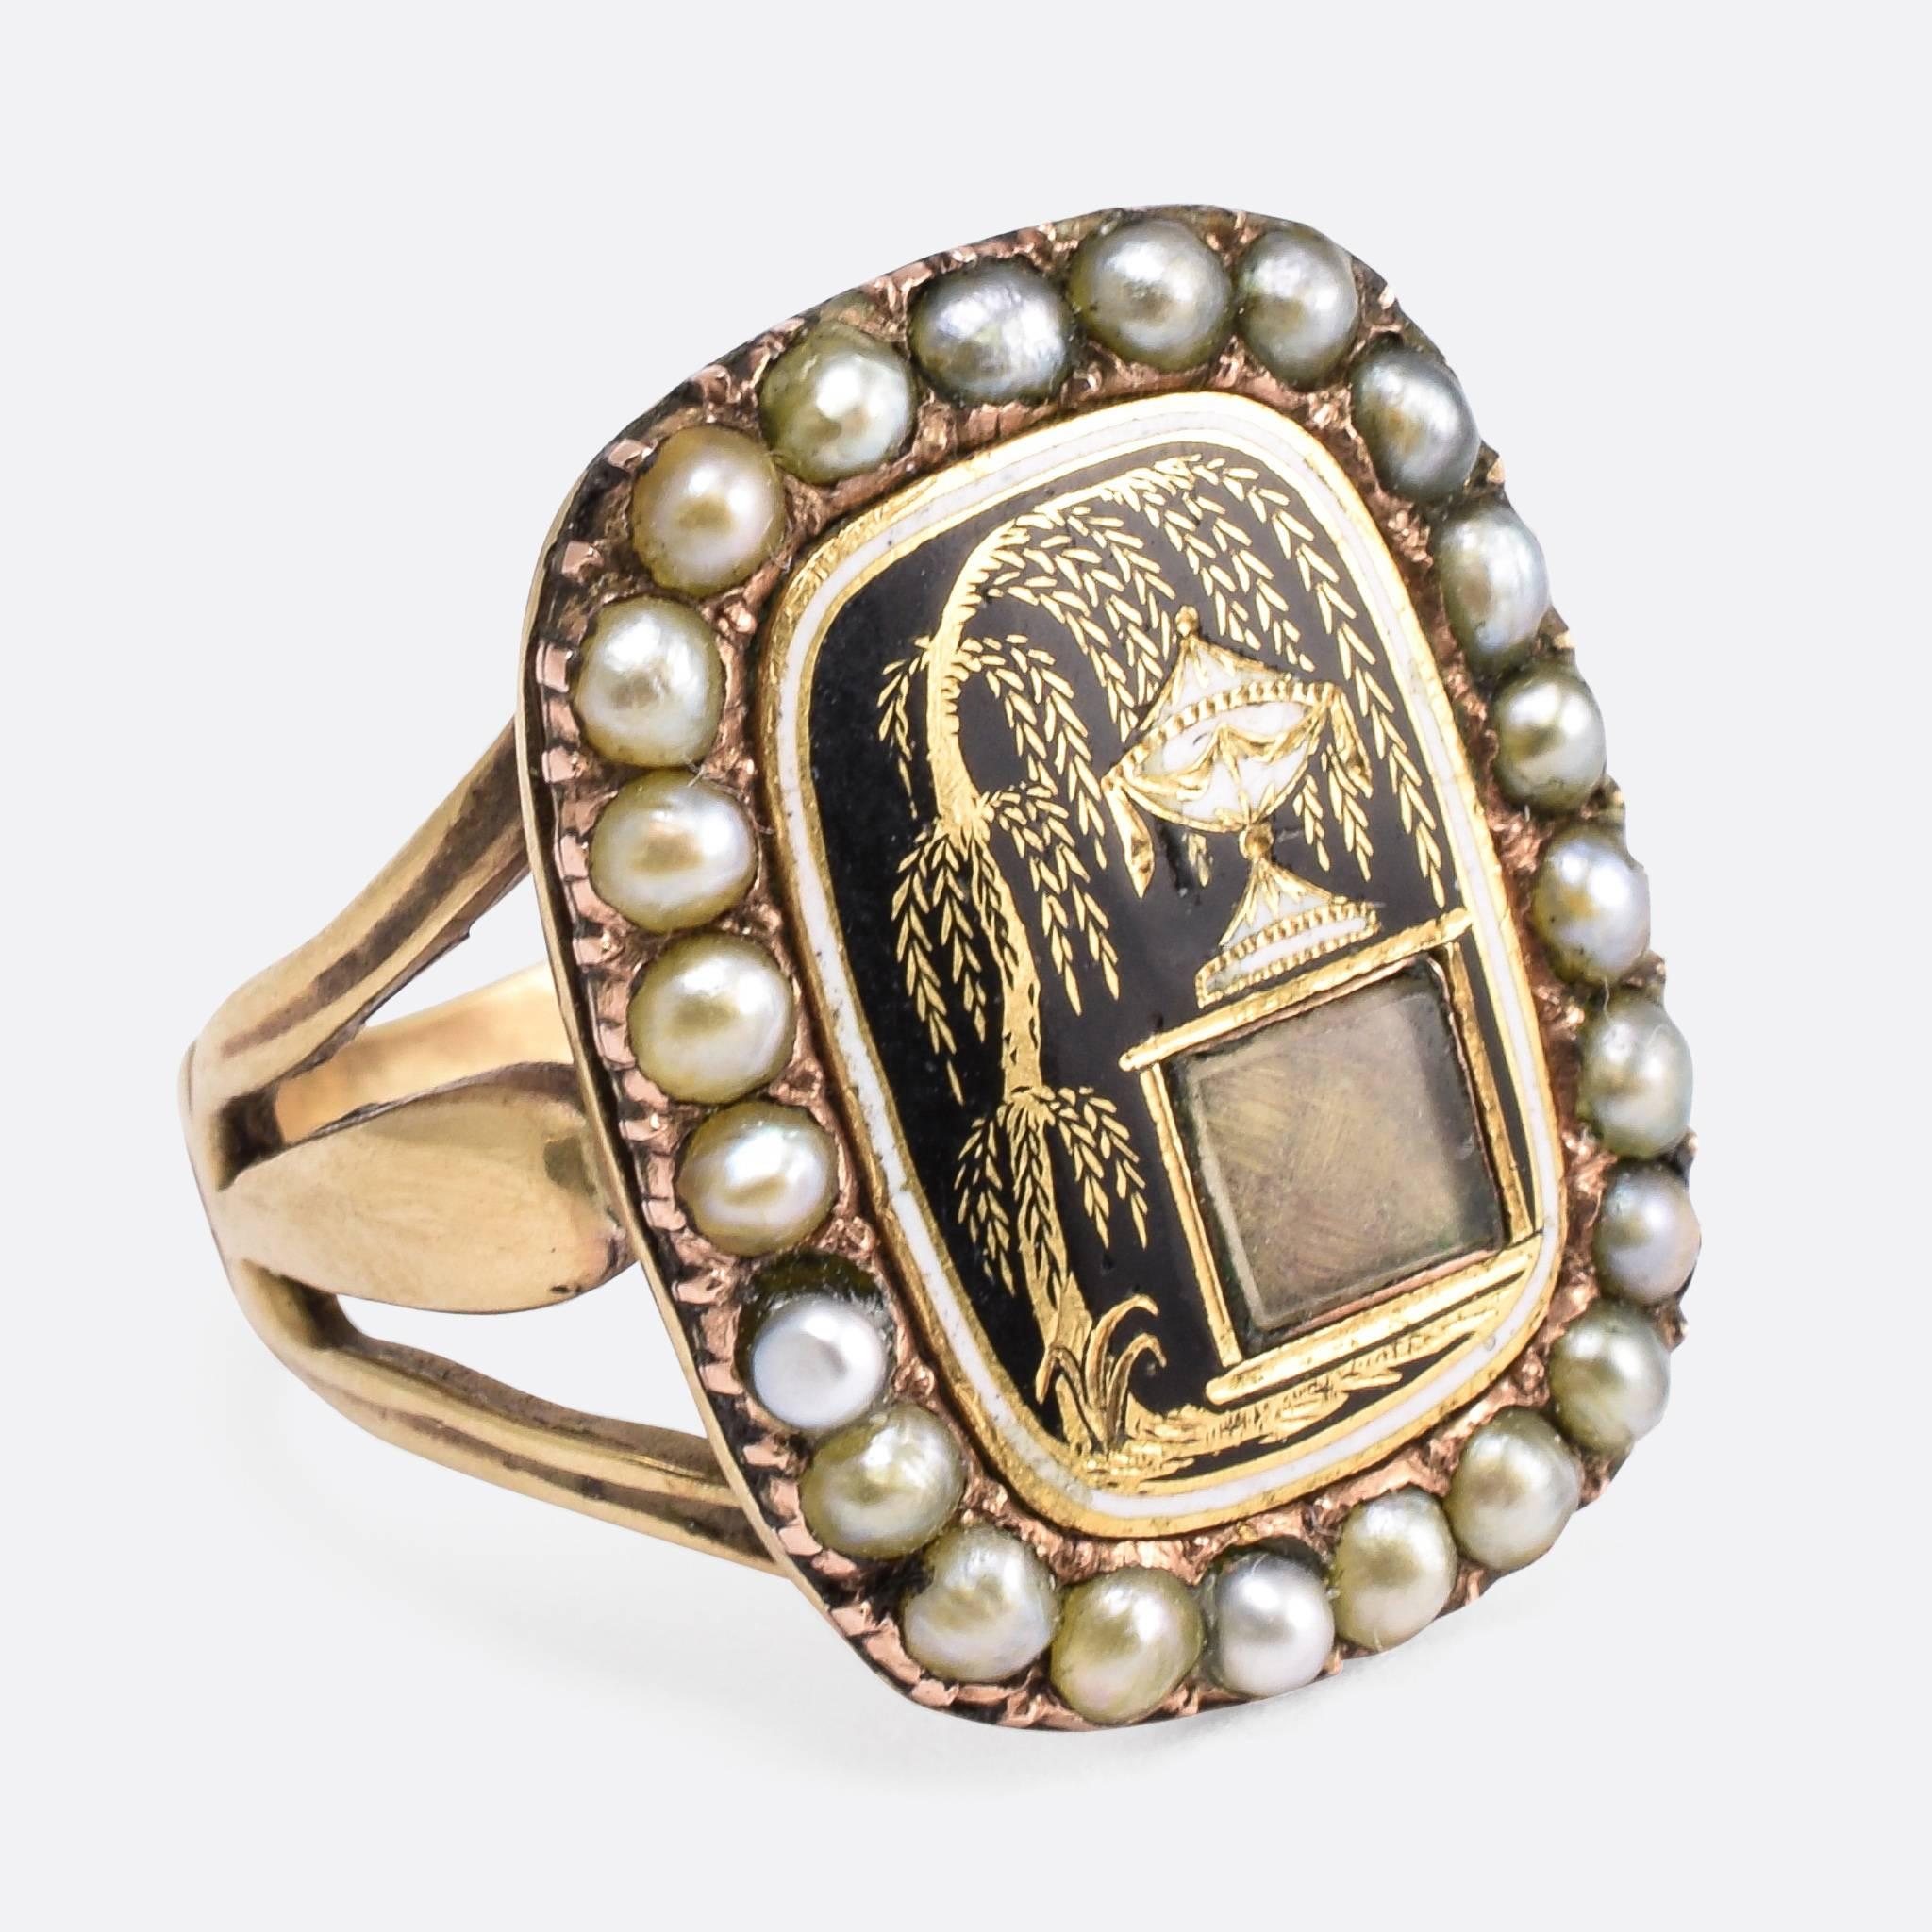 This exquisite antique mourning ring depicts a weeping willow behind an urn - the latter sat atop a plinth containing a small woven lock of hair. The detail is worked in gold, with fine black enamelling to the background, and white enamel on the